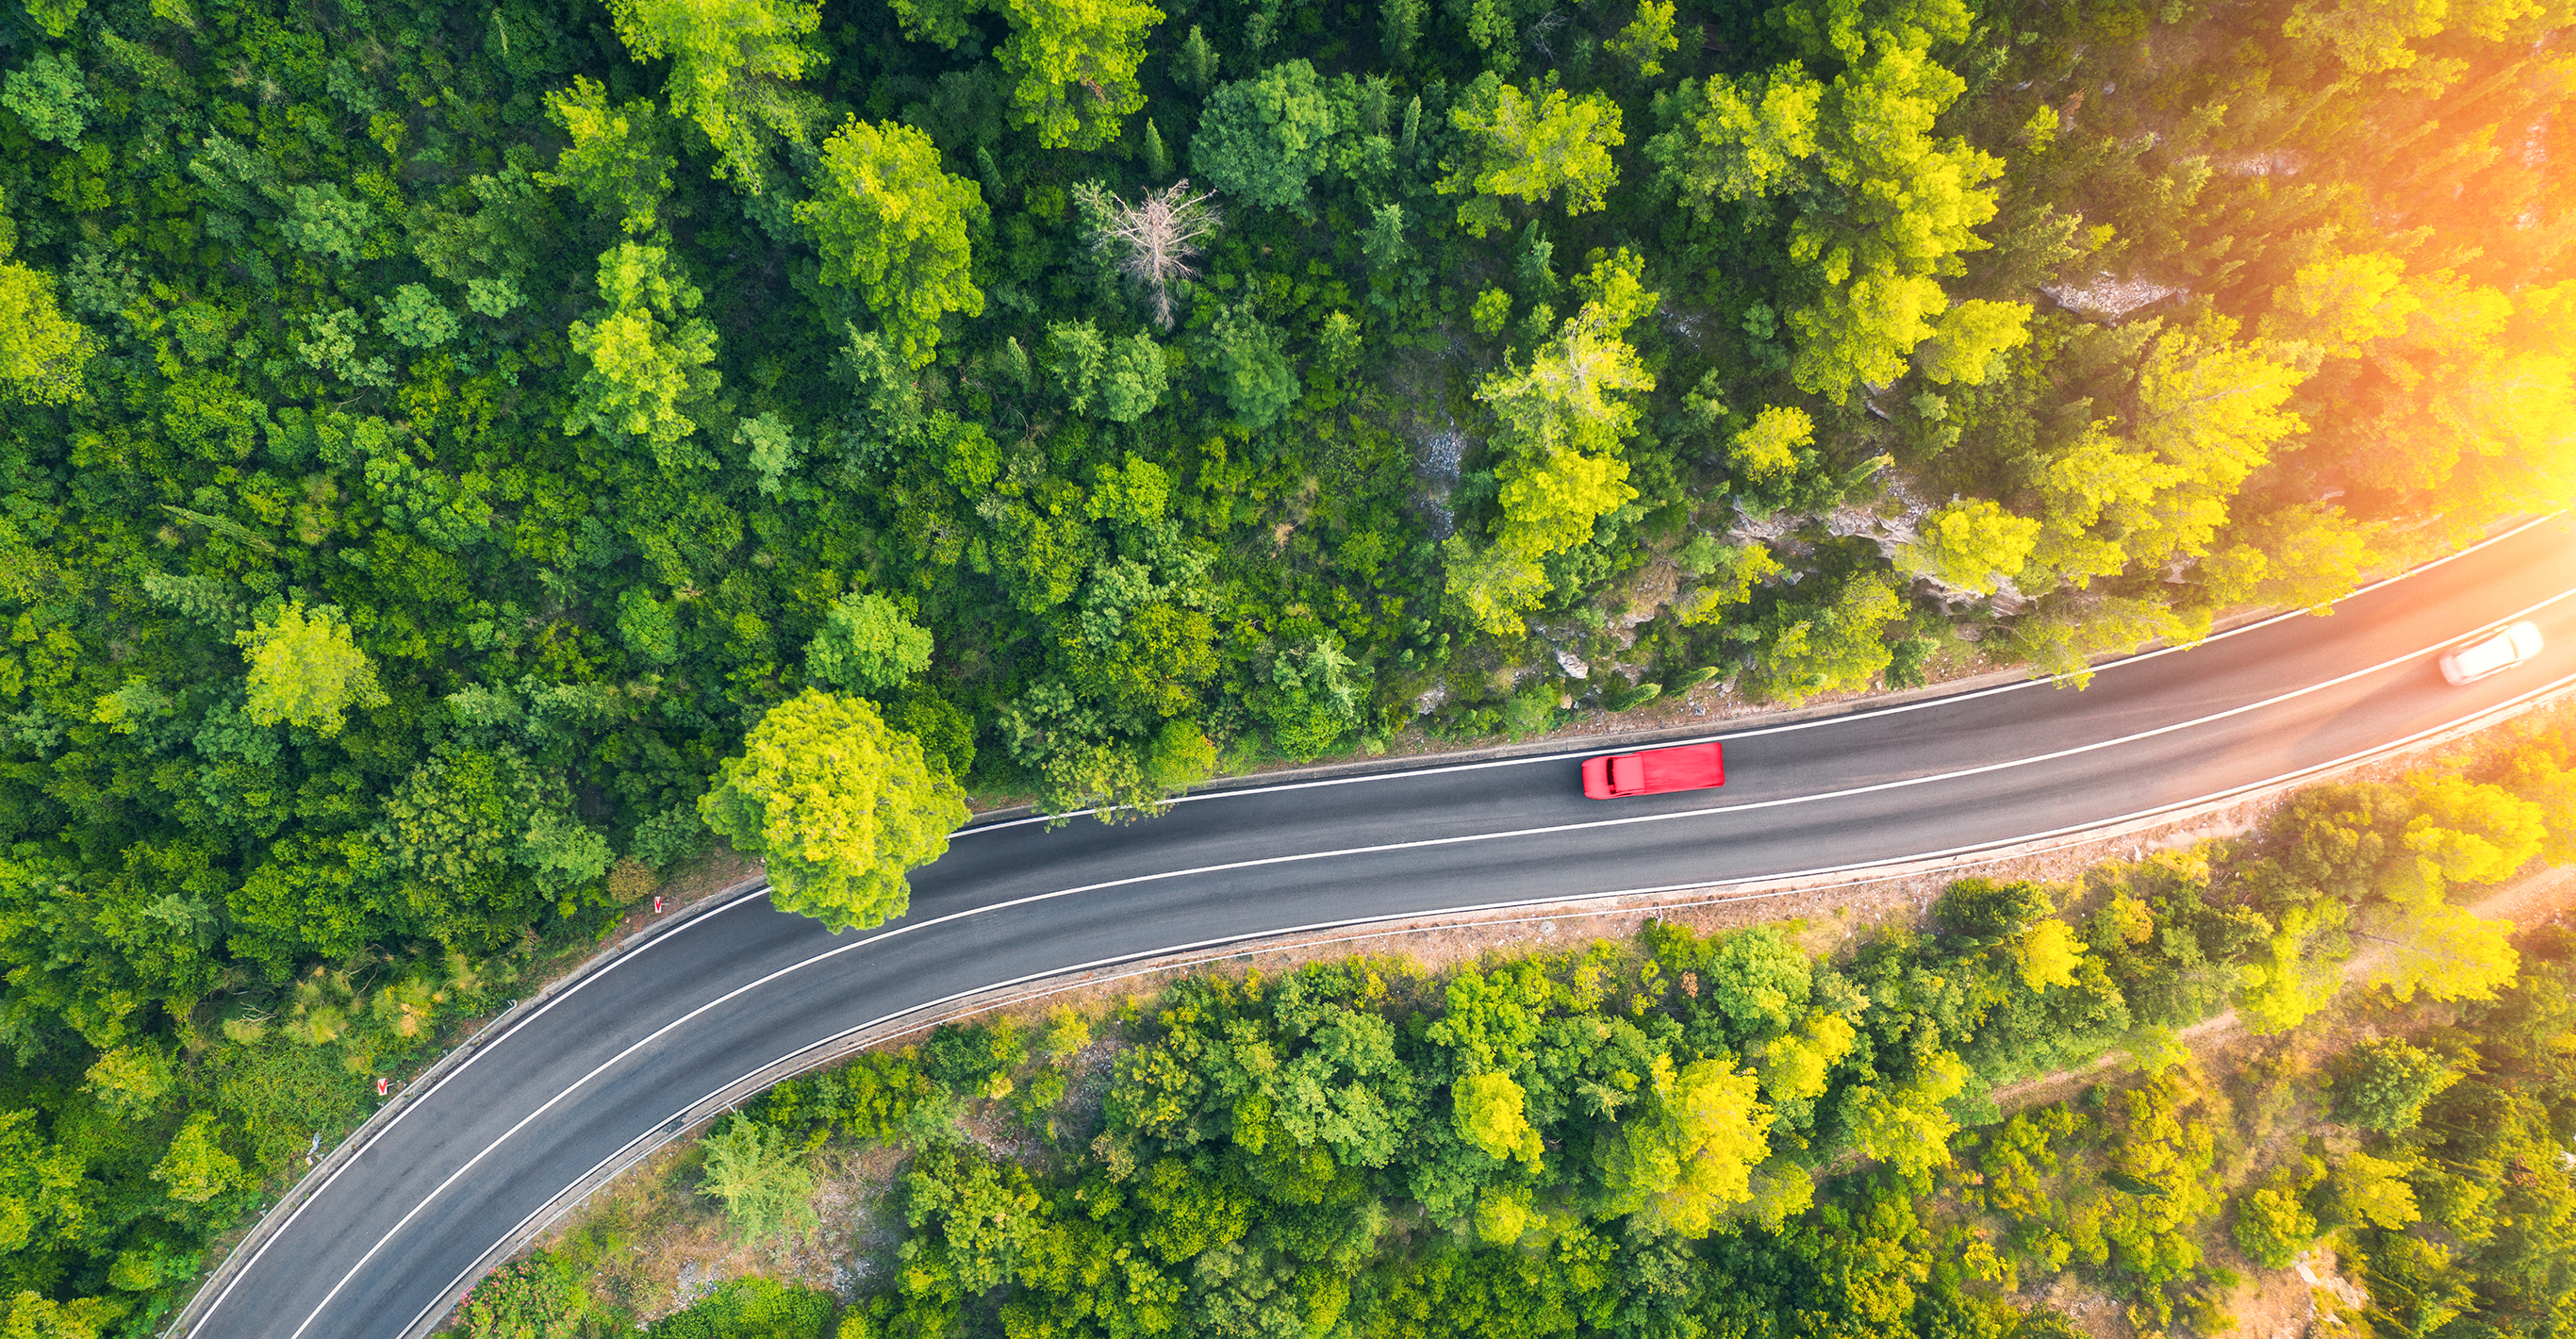 Drone view image of a car driving through the forest